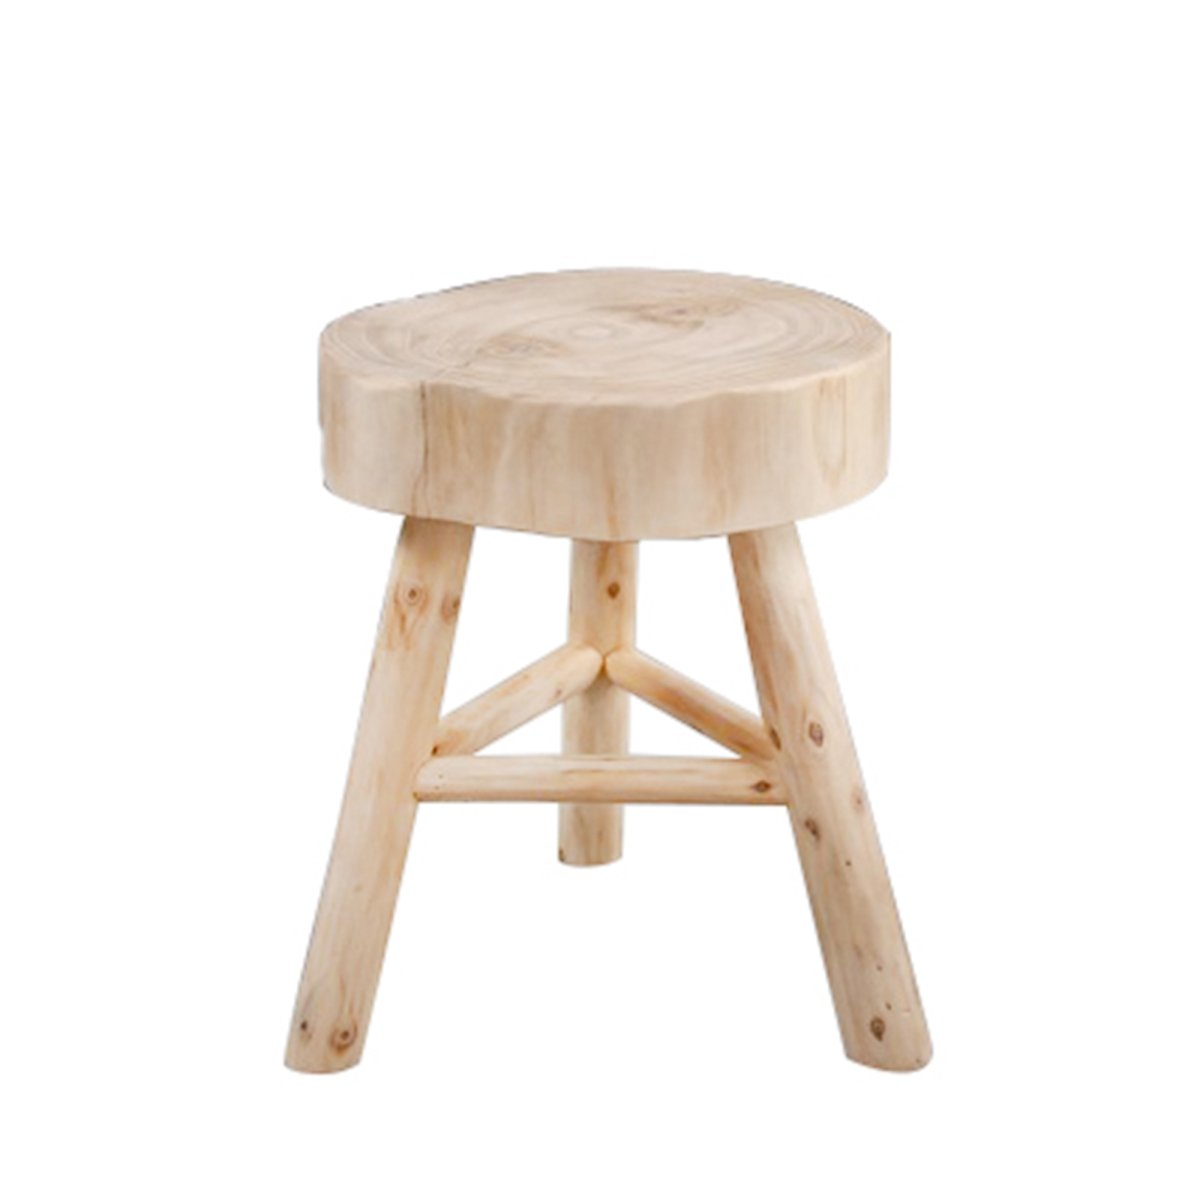 14339-02 15.75 In. Wooden Stool, Natural Color